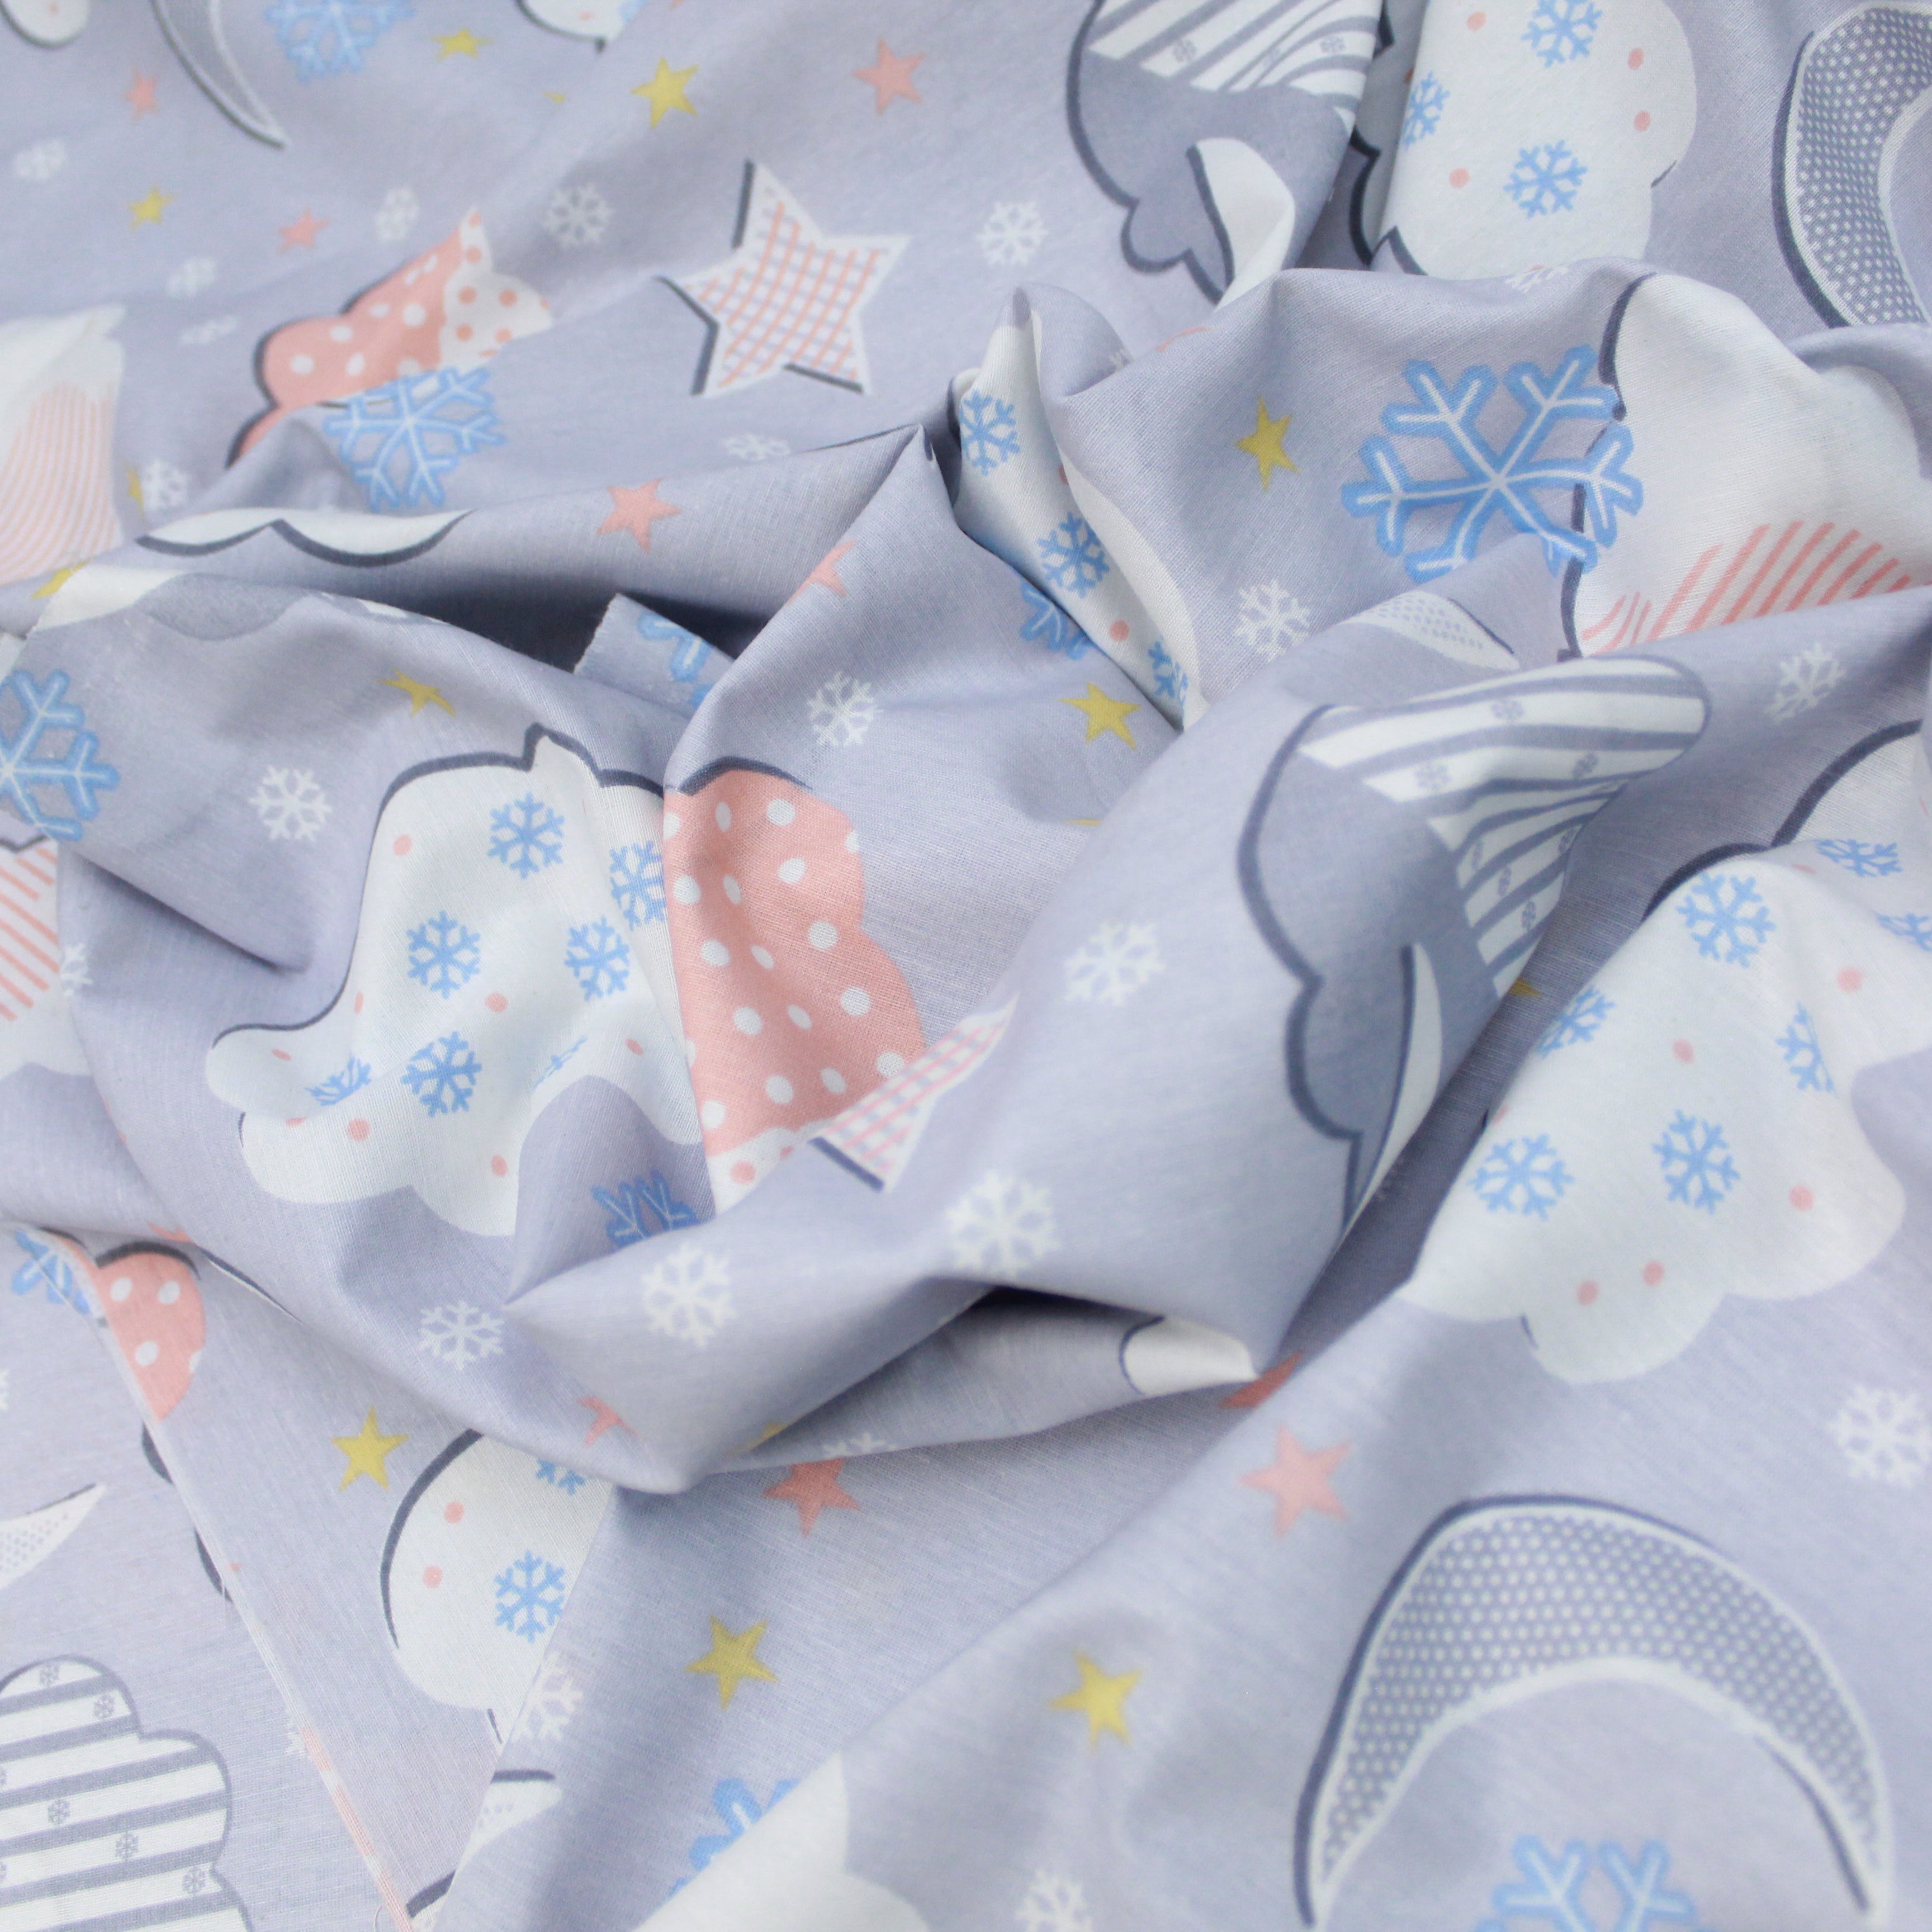 Premium Quality Super Wide Cotton Blend Sheeting “Stars In The Clouds" 94" Wide Light Grey